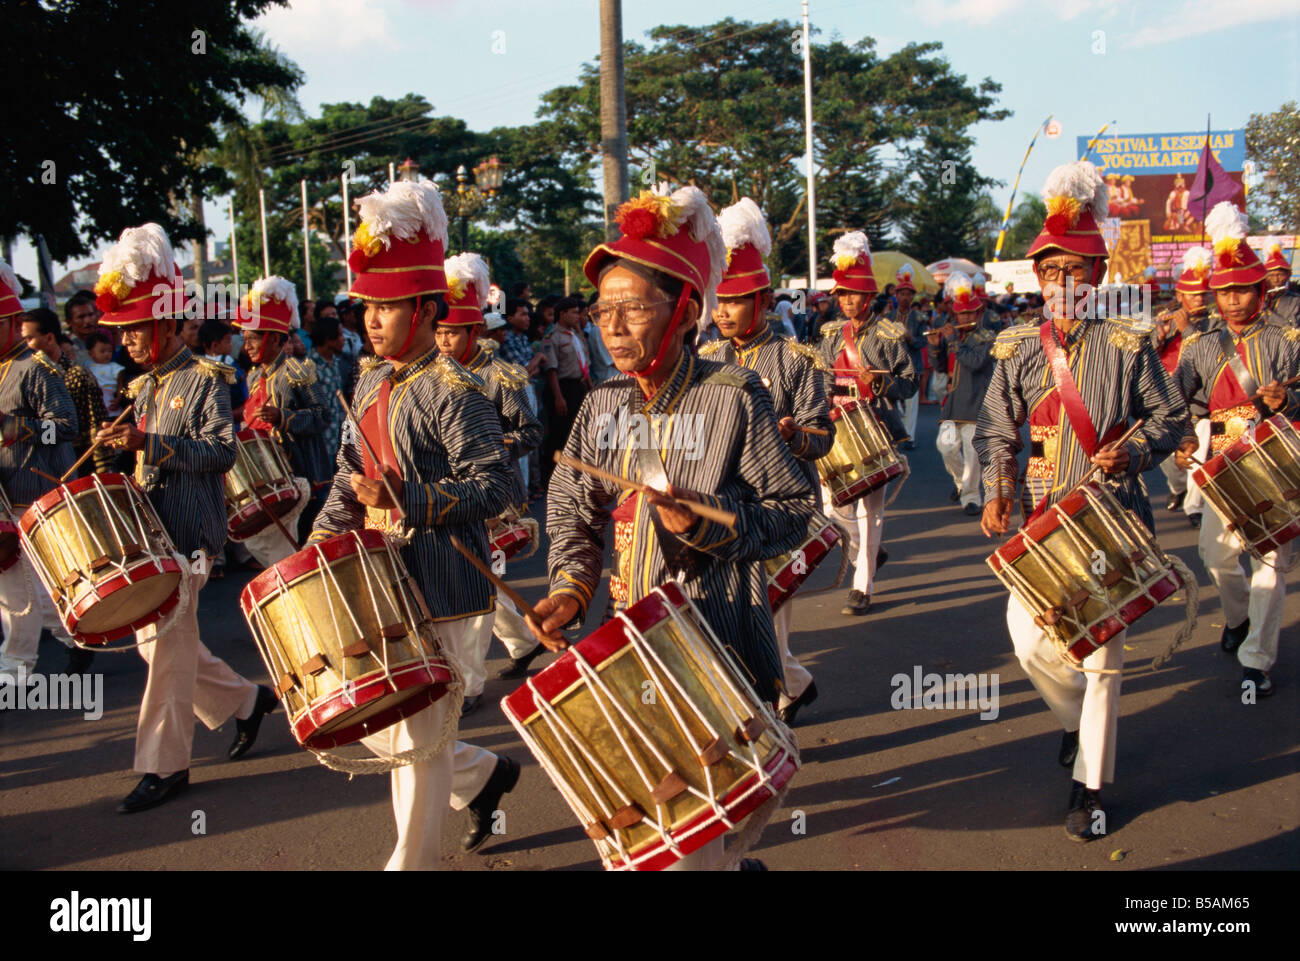 Marching bands on Sultan's birthday, Jogjakarta, Java, Indonesia, Southeast Asia Stock Photo